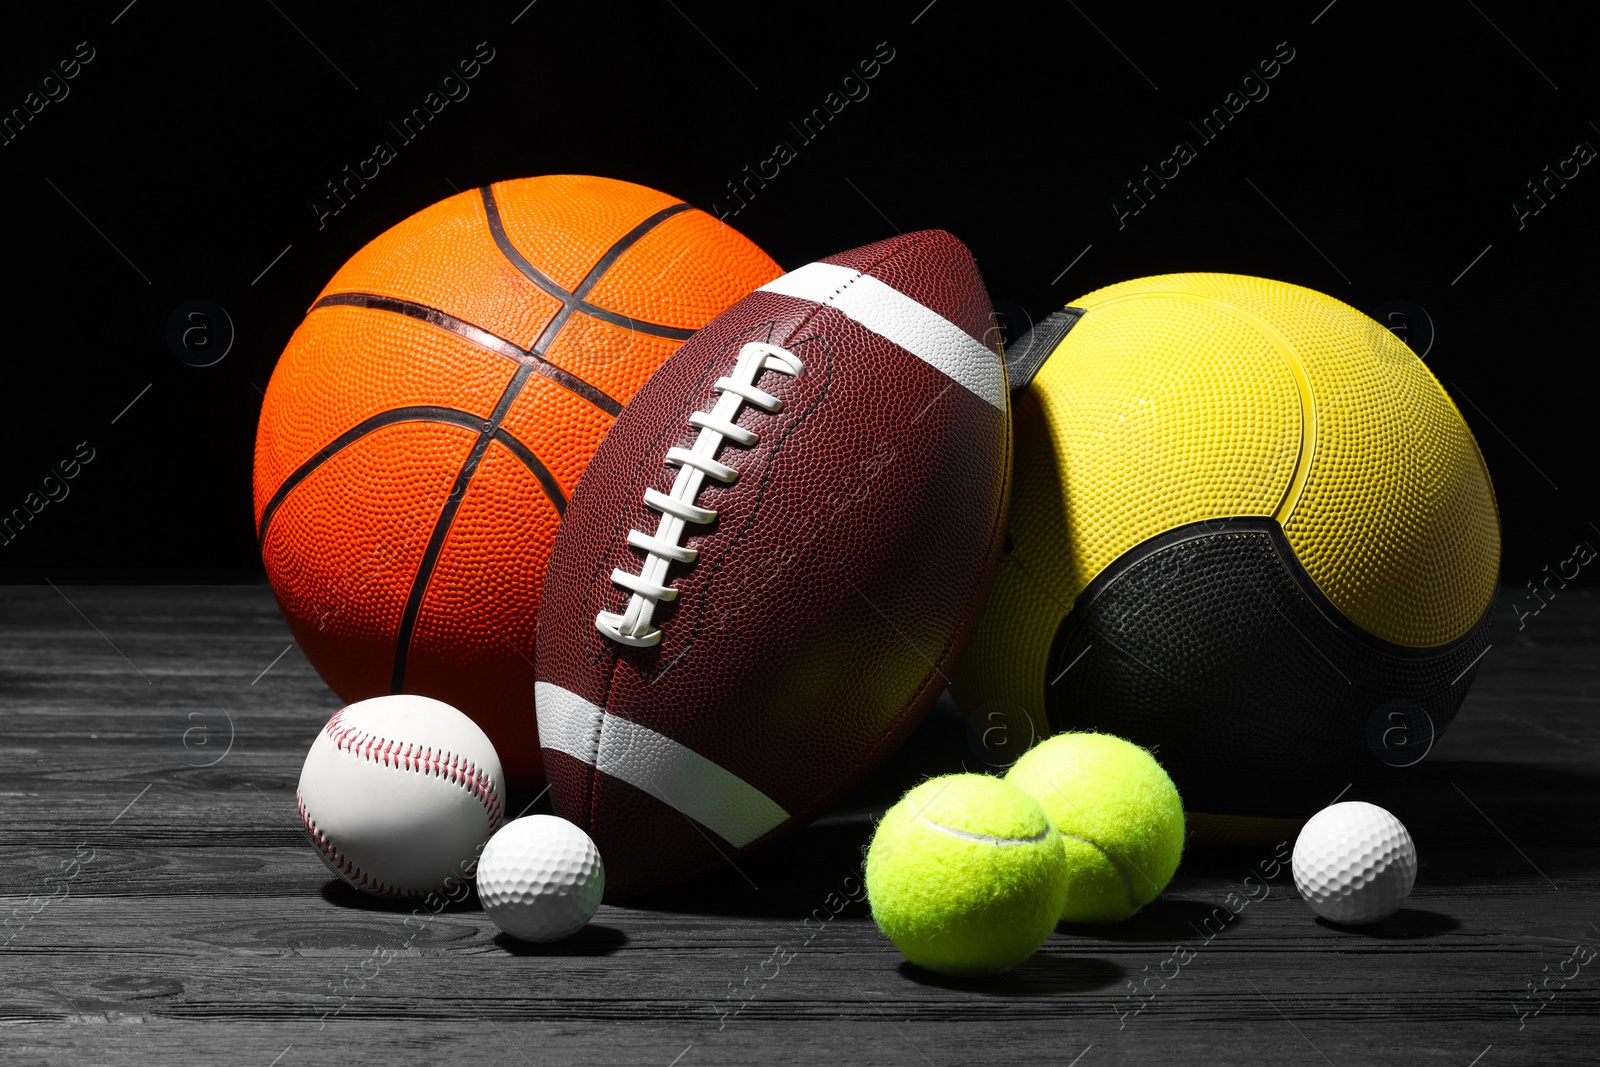 Photo of Many different sport balls on dark wooden table against black background